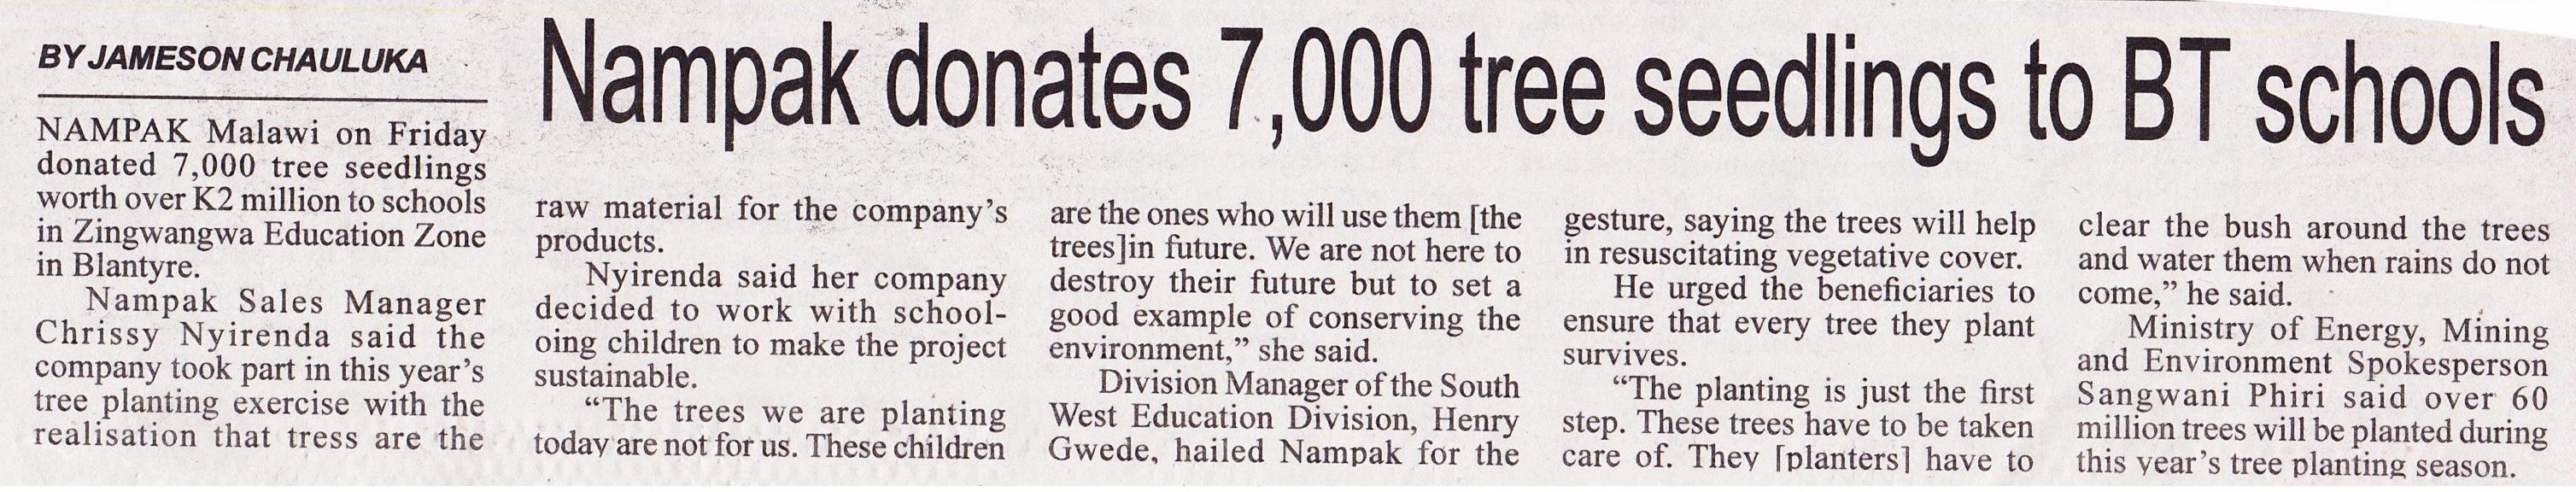 2017-01-30_Mon_Nampak donates 7000 tree seedlings to BT schools_The Daily Times.png